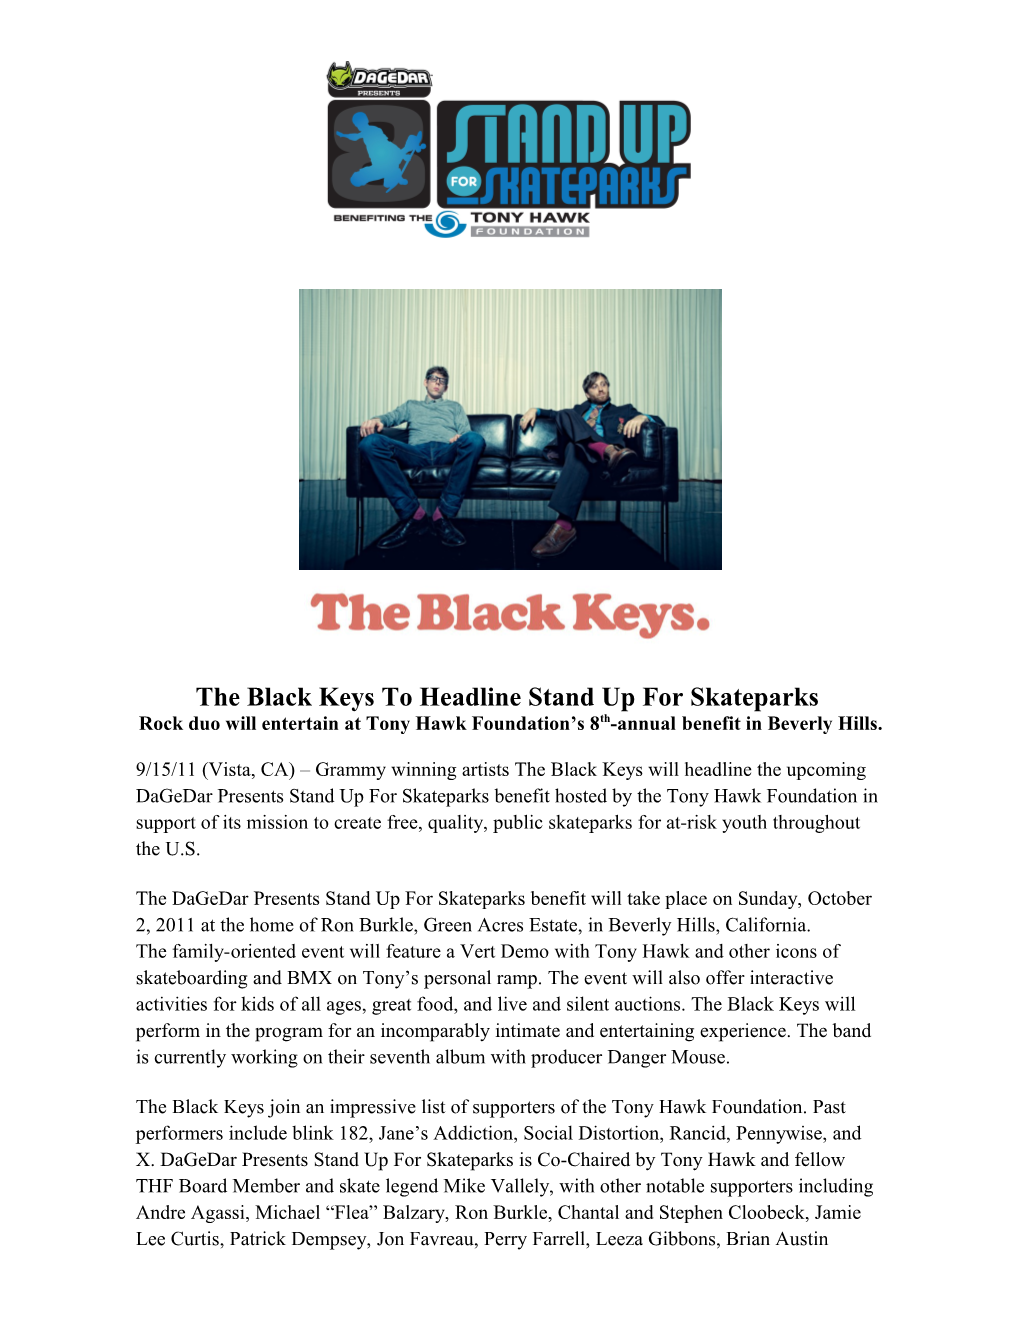 The Black Keys to Perform at Stand up for Skateparks